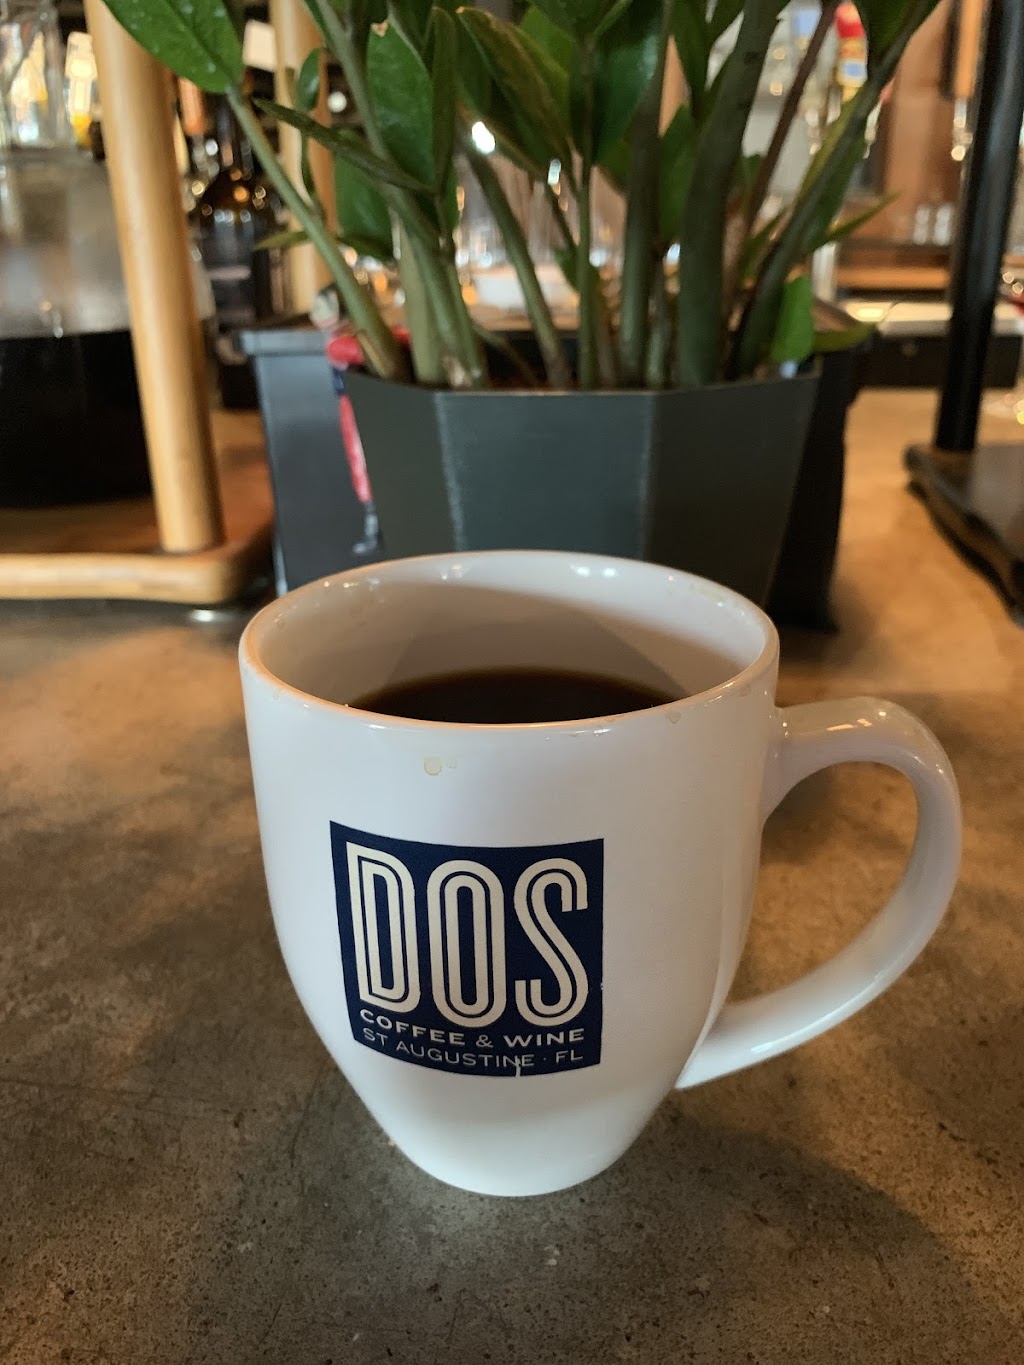 DOS Coffee & Wine | 300 San Marco Ave, St. Augustine, FL 32084 | Phone: (904) 342-2421